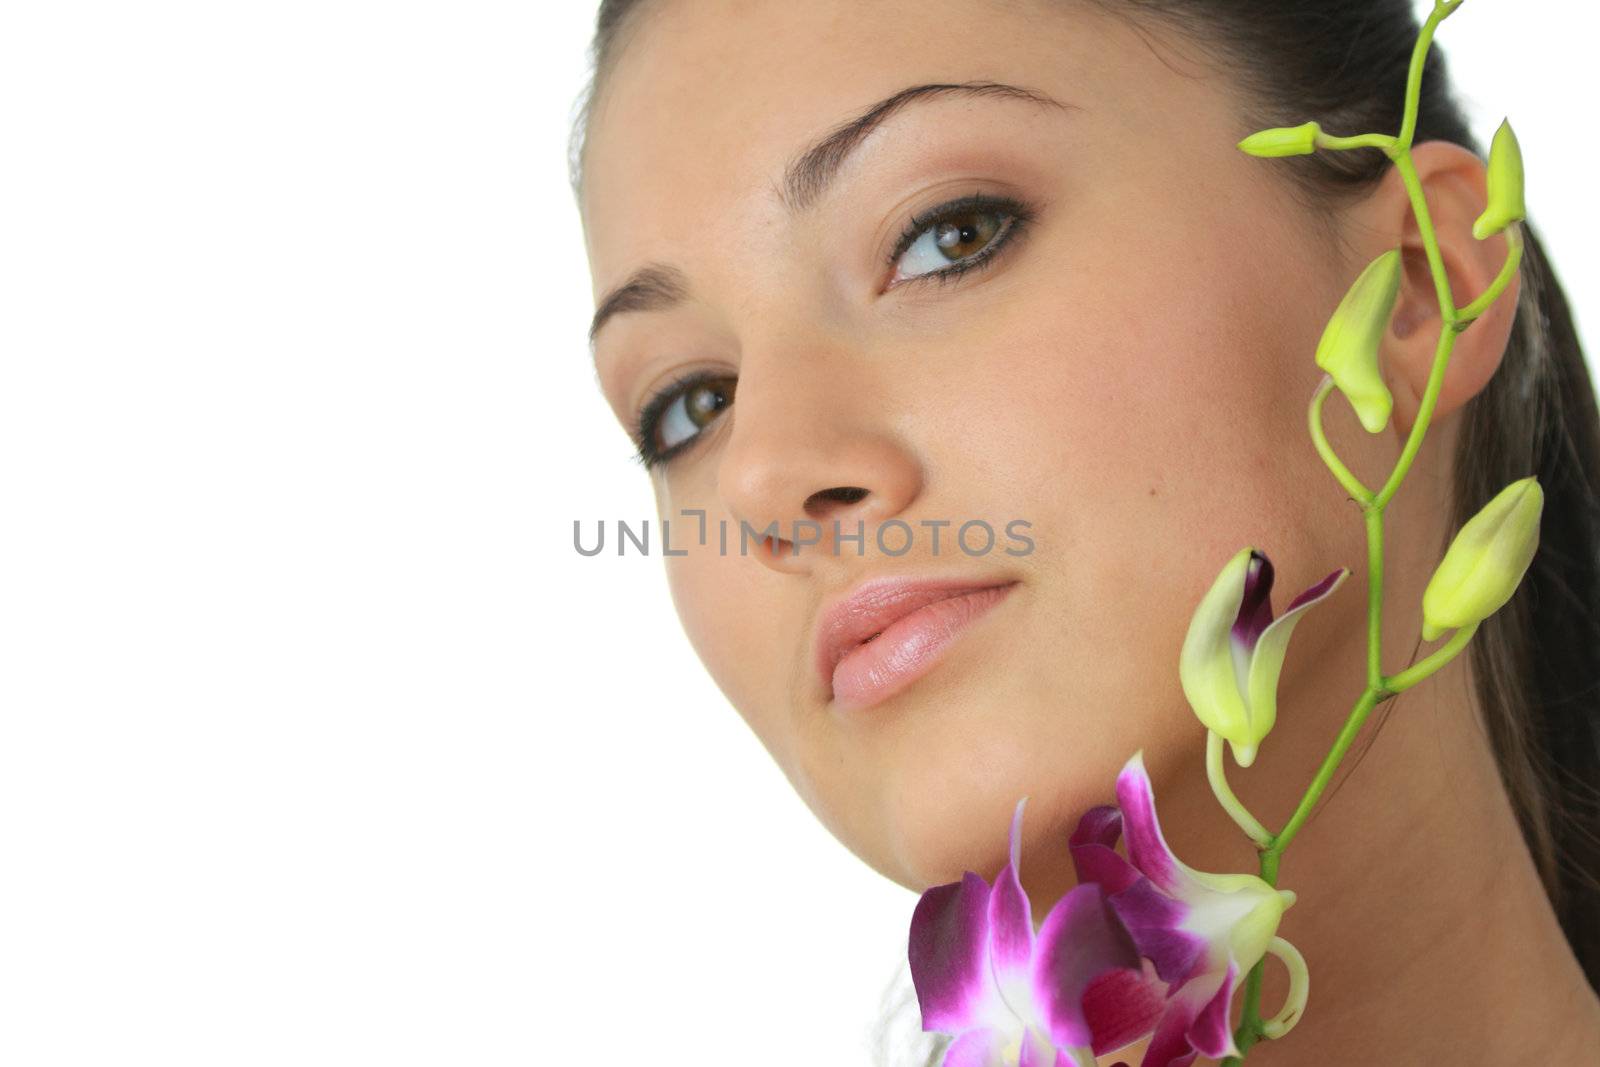 Beauteful spa girl with orchid isolated on white background